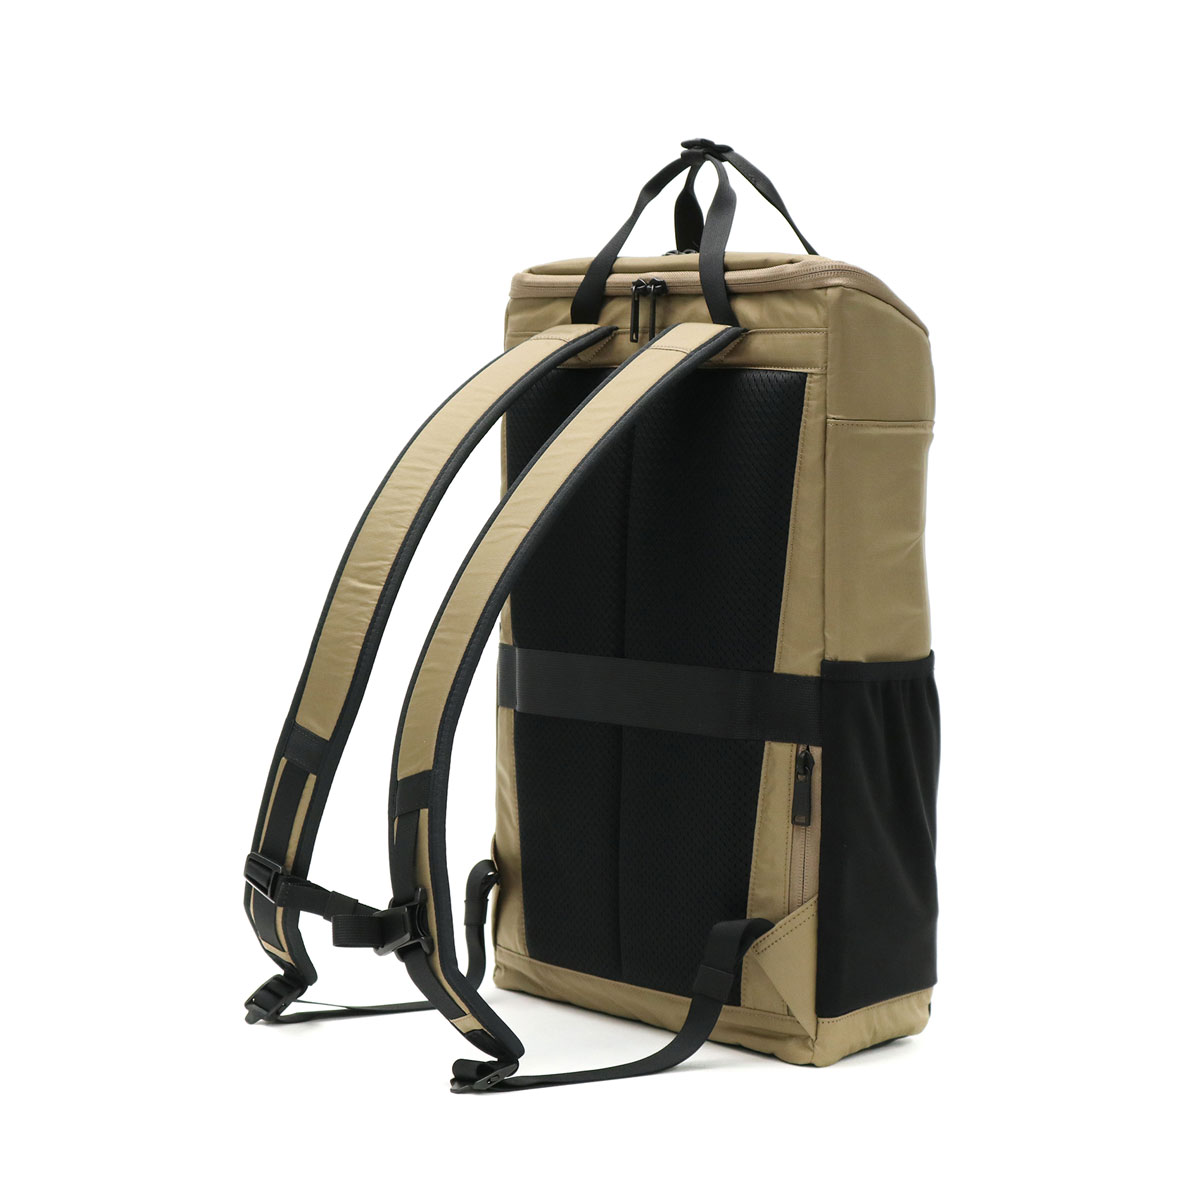 CIE シー CUBE BACKPACK バックパック 022000｜【正規販売店】カバン ...